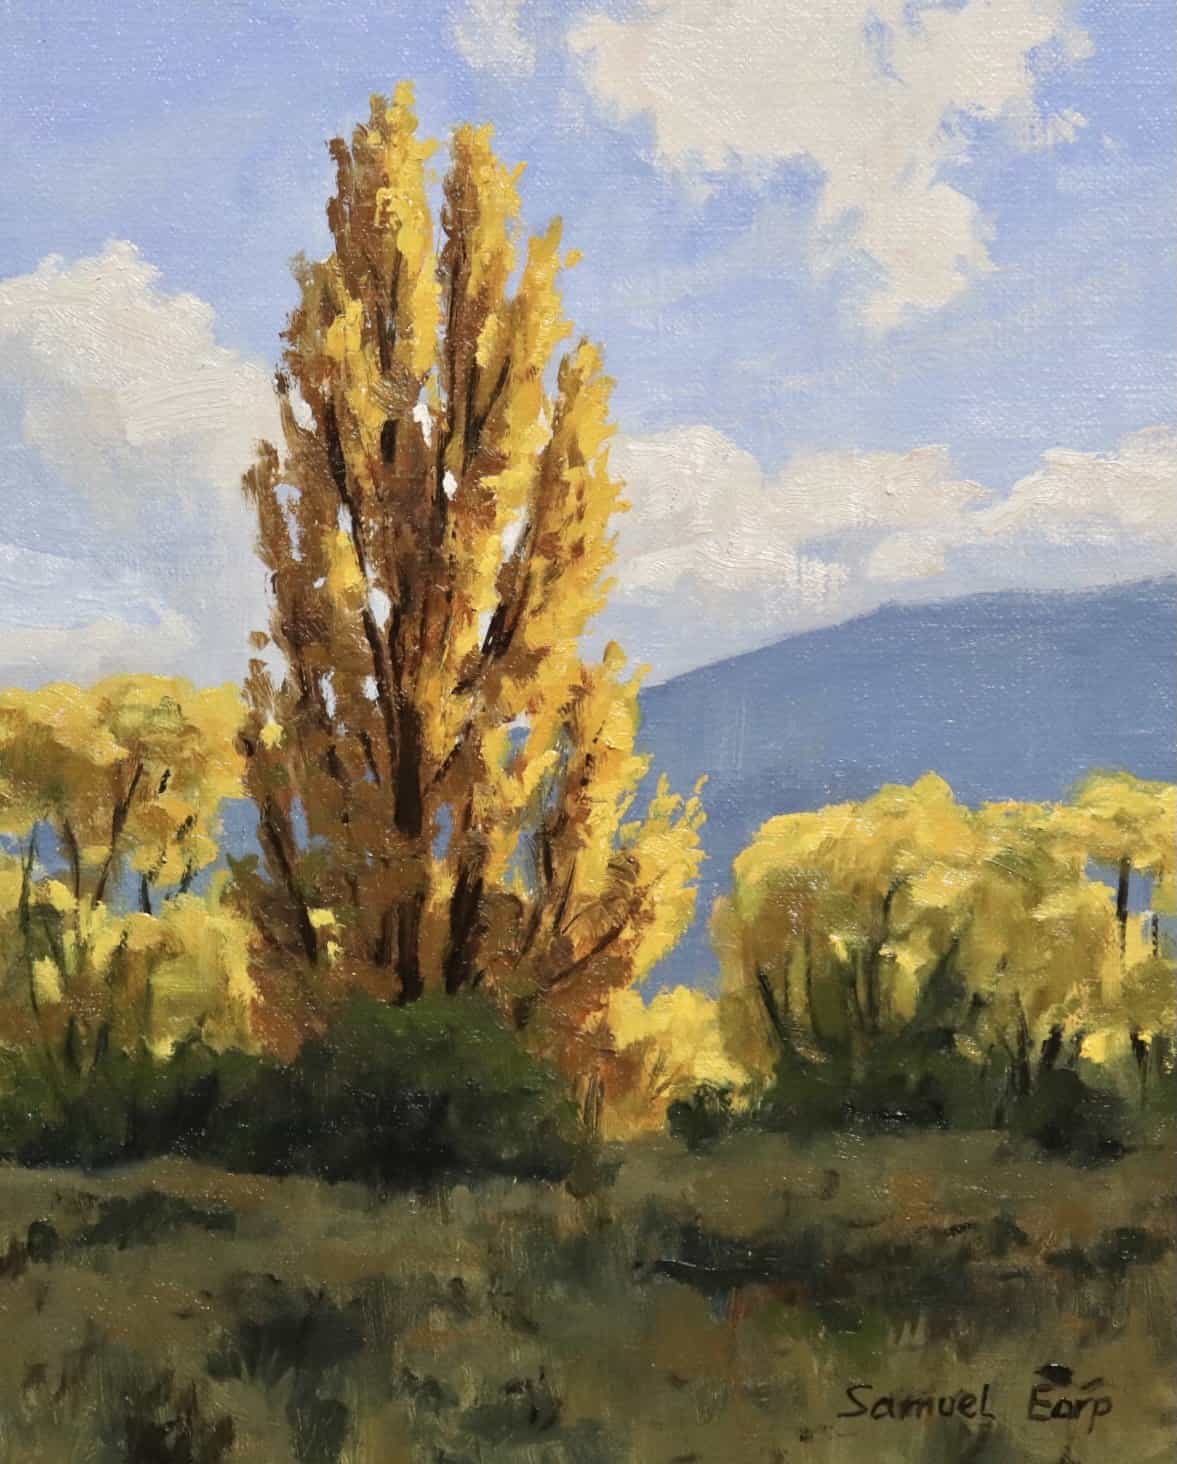 How to Paint Trees and Leaves - Samuel Earp Artist